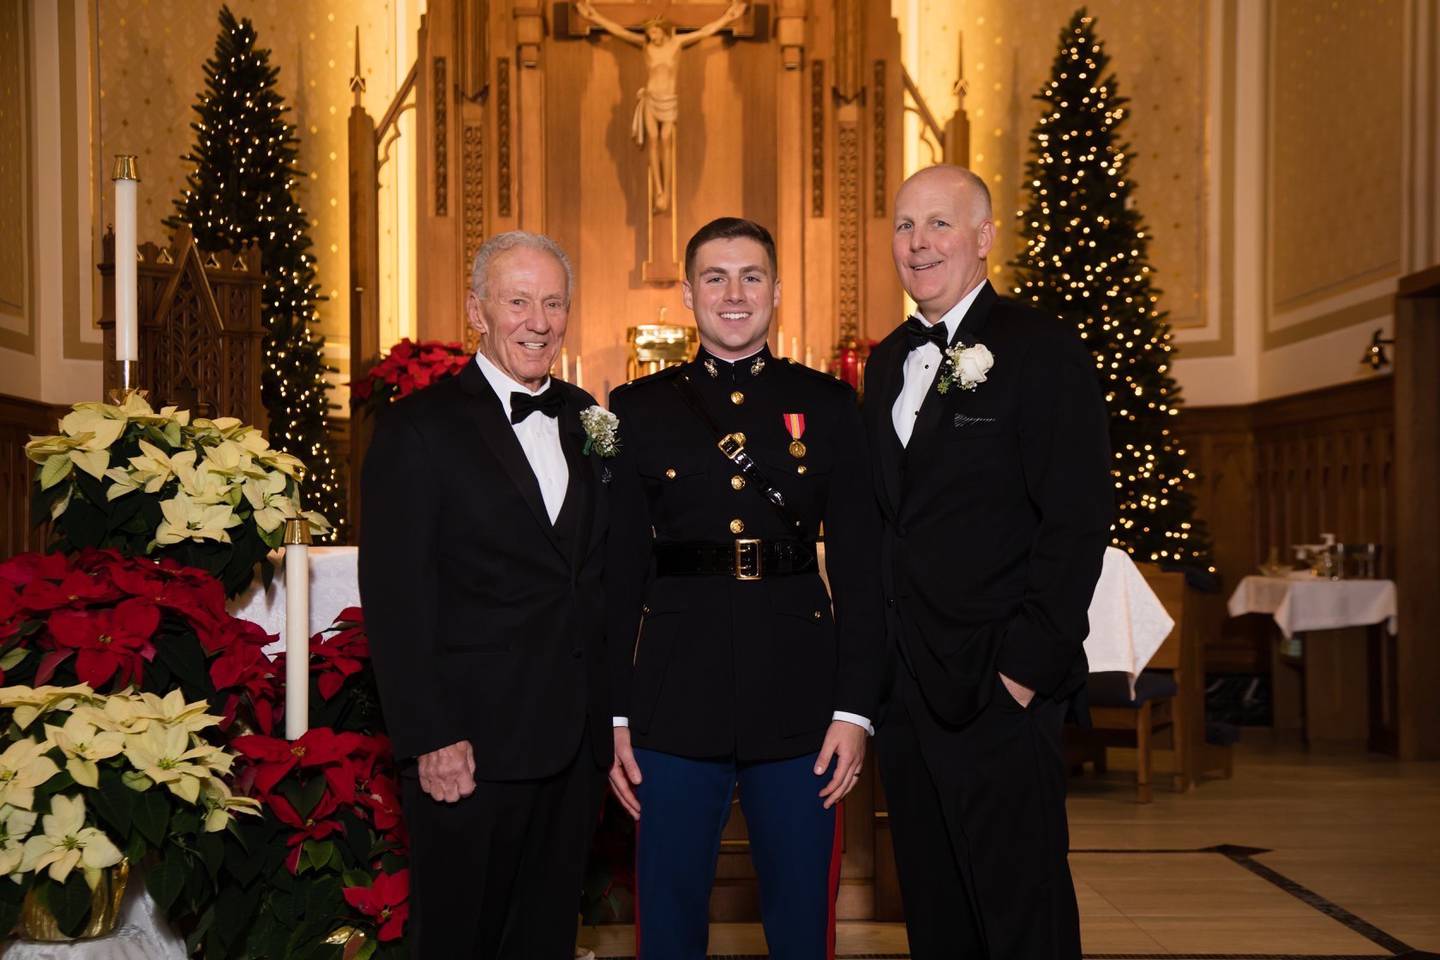 Paul, Steven and Anthony Wember at Steven Wember's wedding in 2018 in Lake Geneva, Wisconsin. Three generations of U.S. Marine jet pilots.